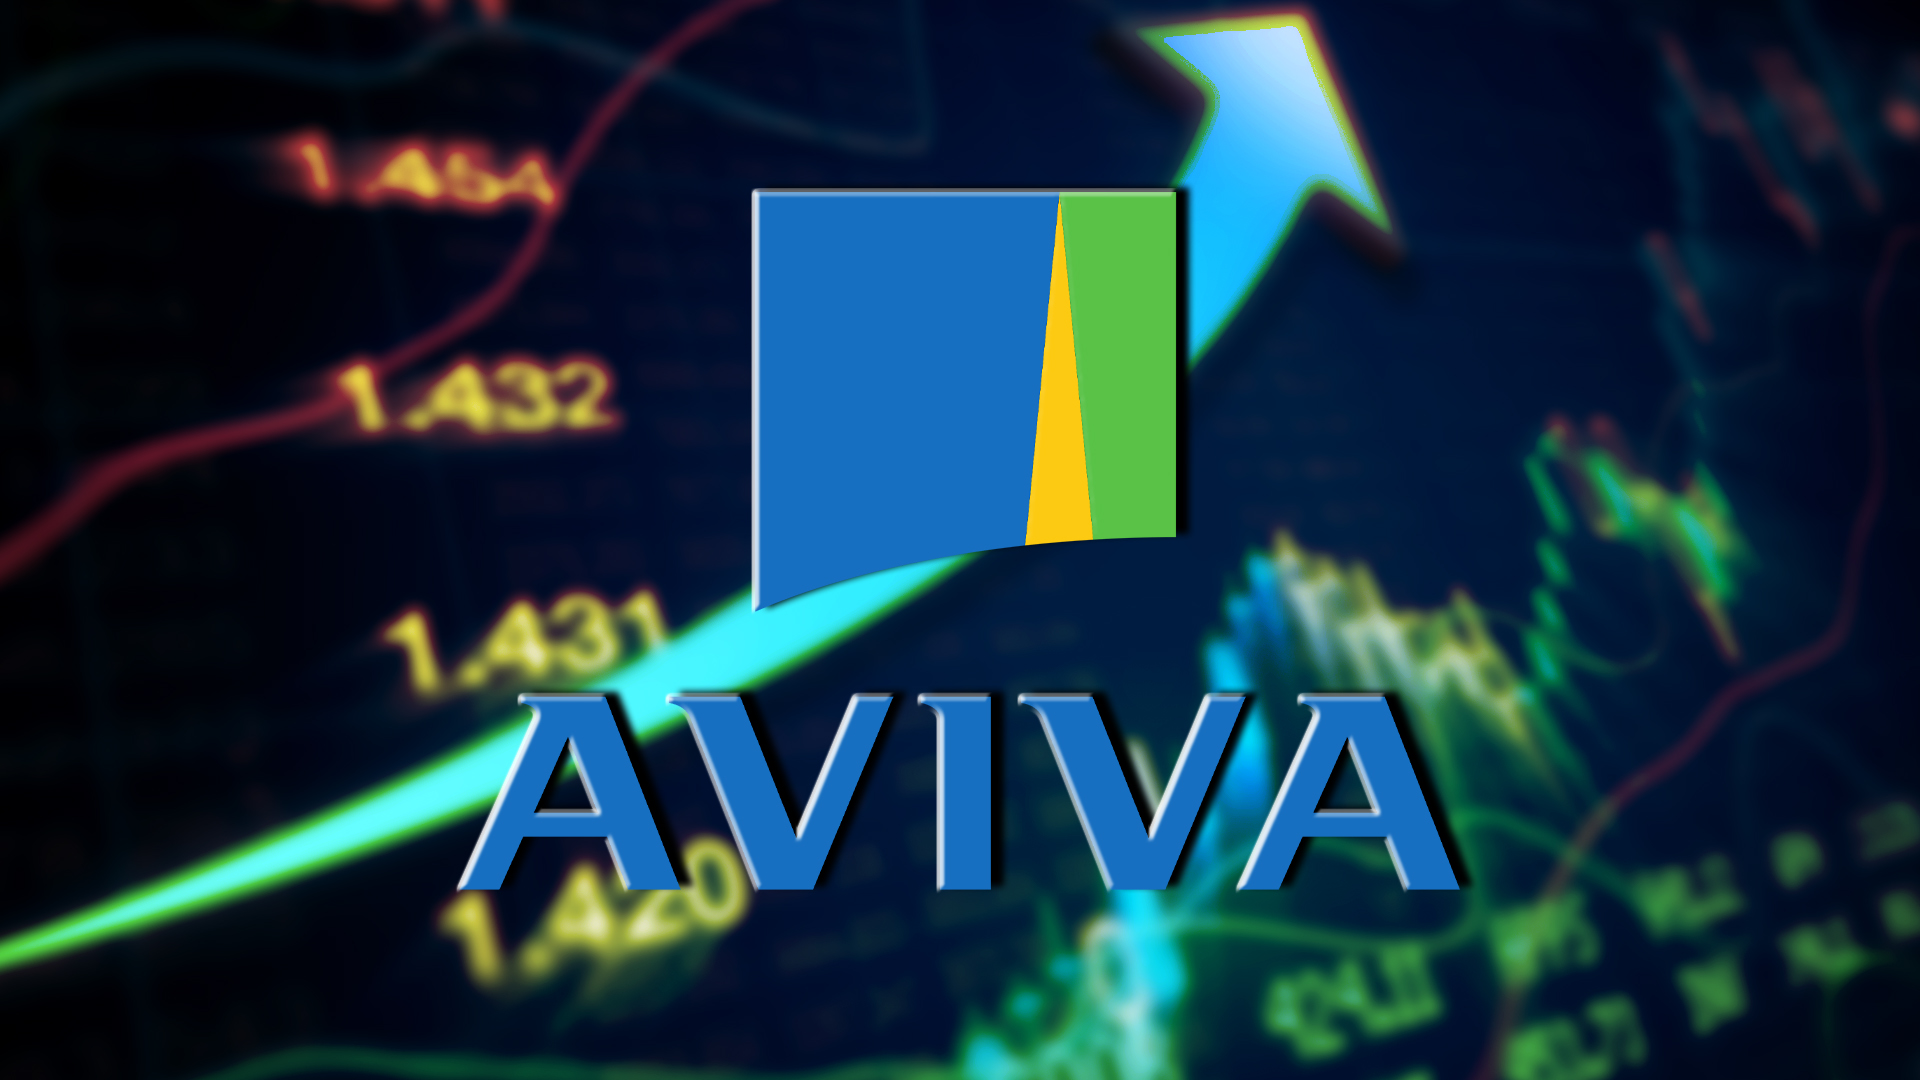 Aviva shares shoot up as activist investor Cevian Capital builds a stake in  insurance giant - MarketWatch